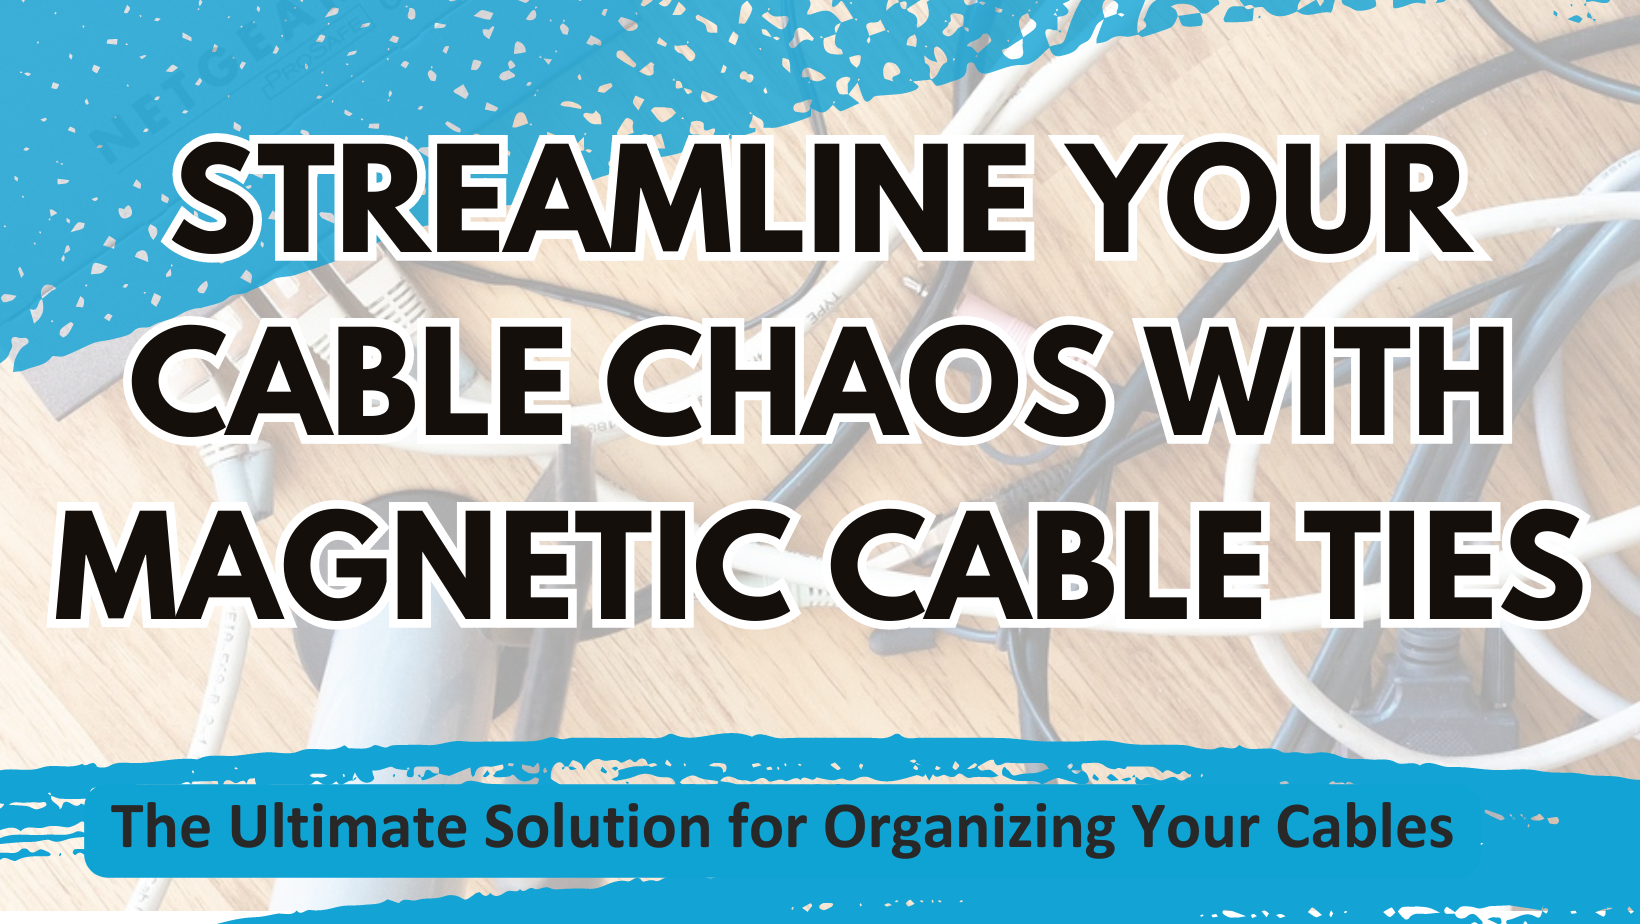 Streamline Your Cable Chaos with Magnetic Cable Ties: The Ultimate Organizing Solution